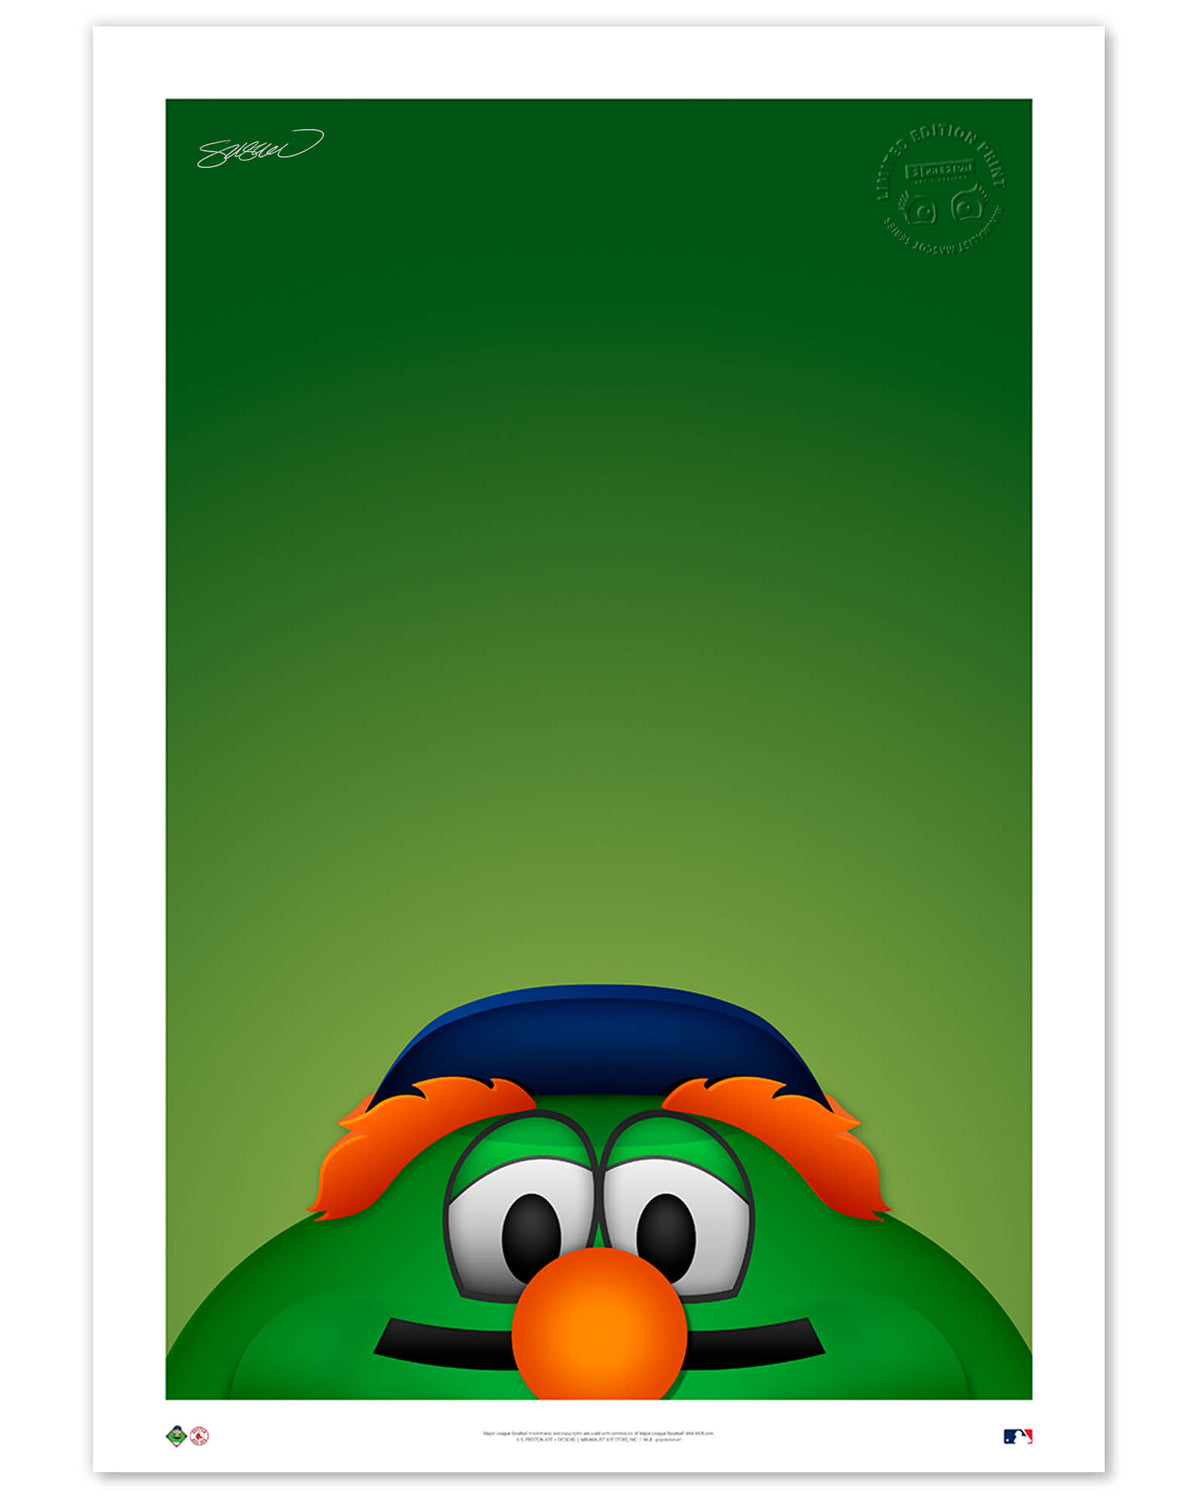 Minimalist Wally the Green Monster